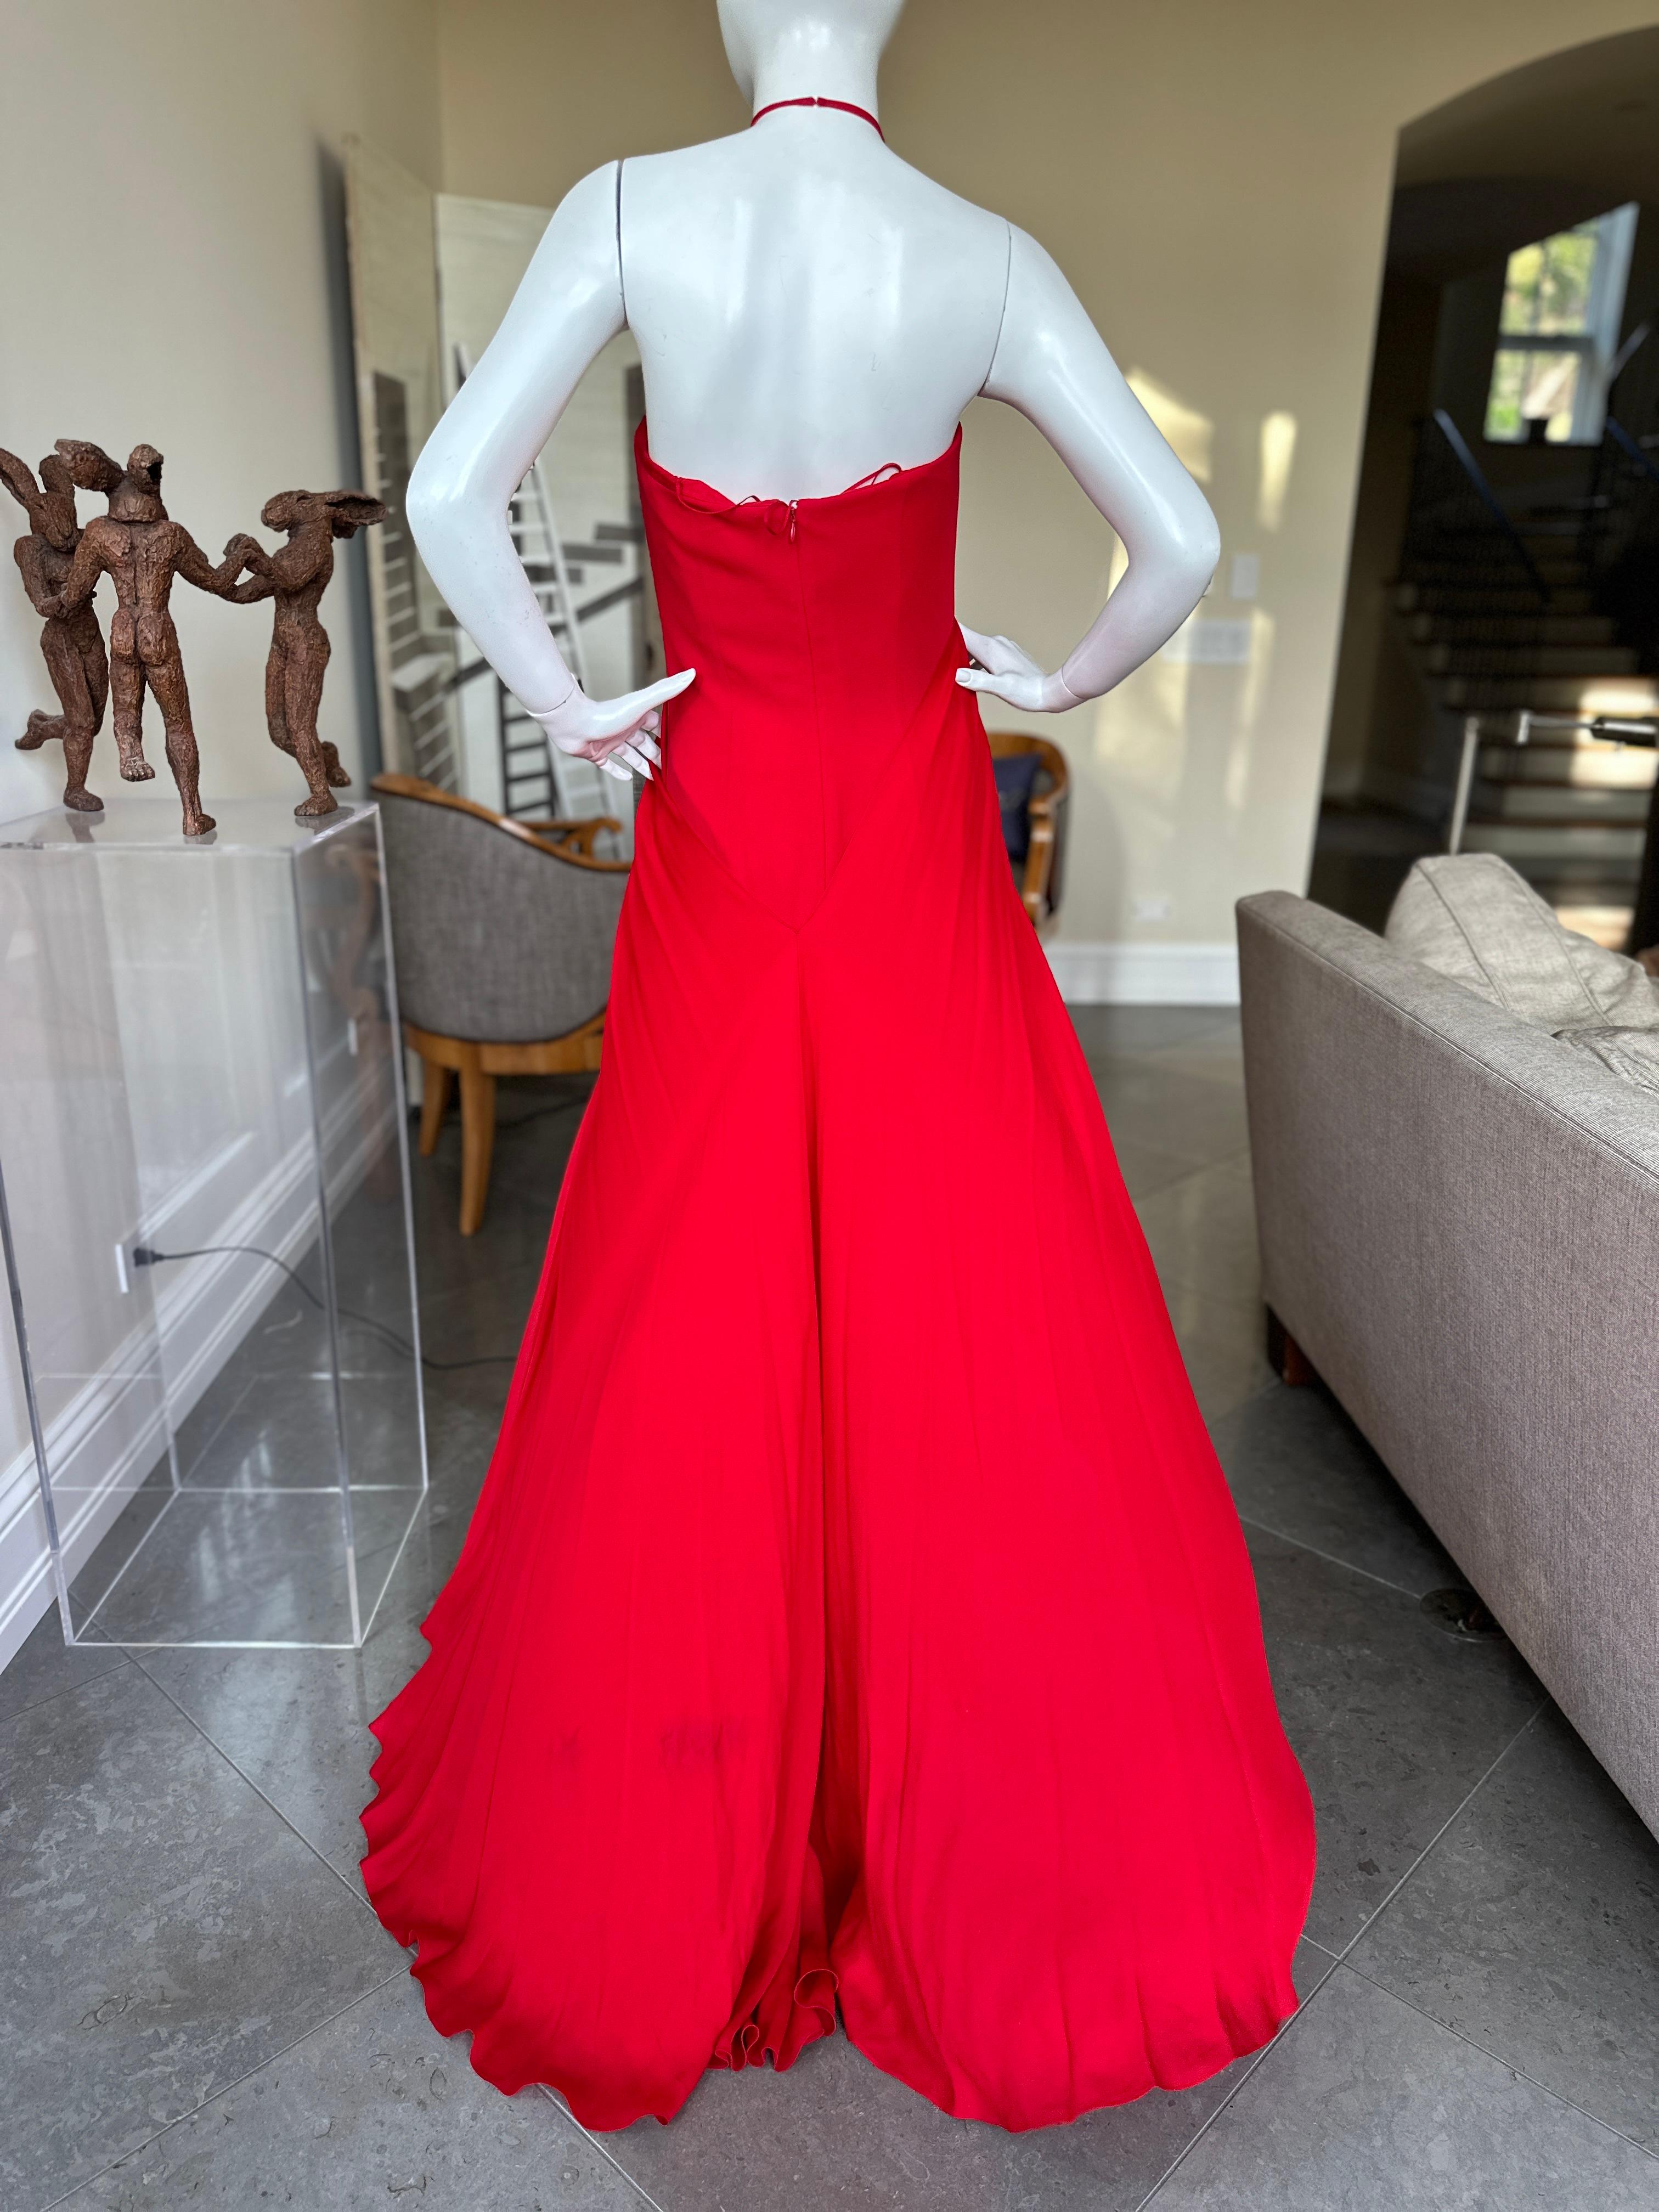 Bill Blass Vintage 1980's Red Silk Evening Dress with Attached Cape For Sale 5